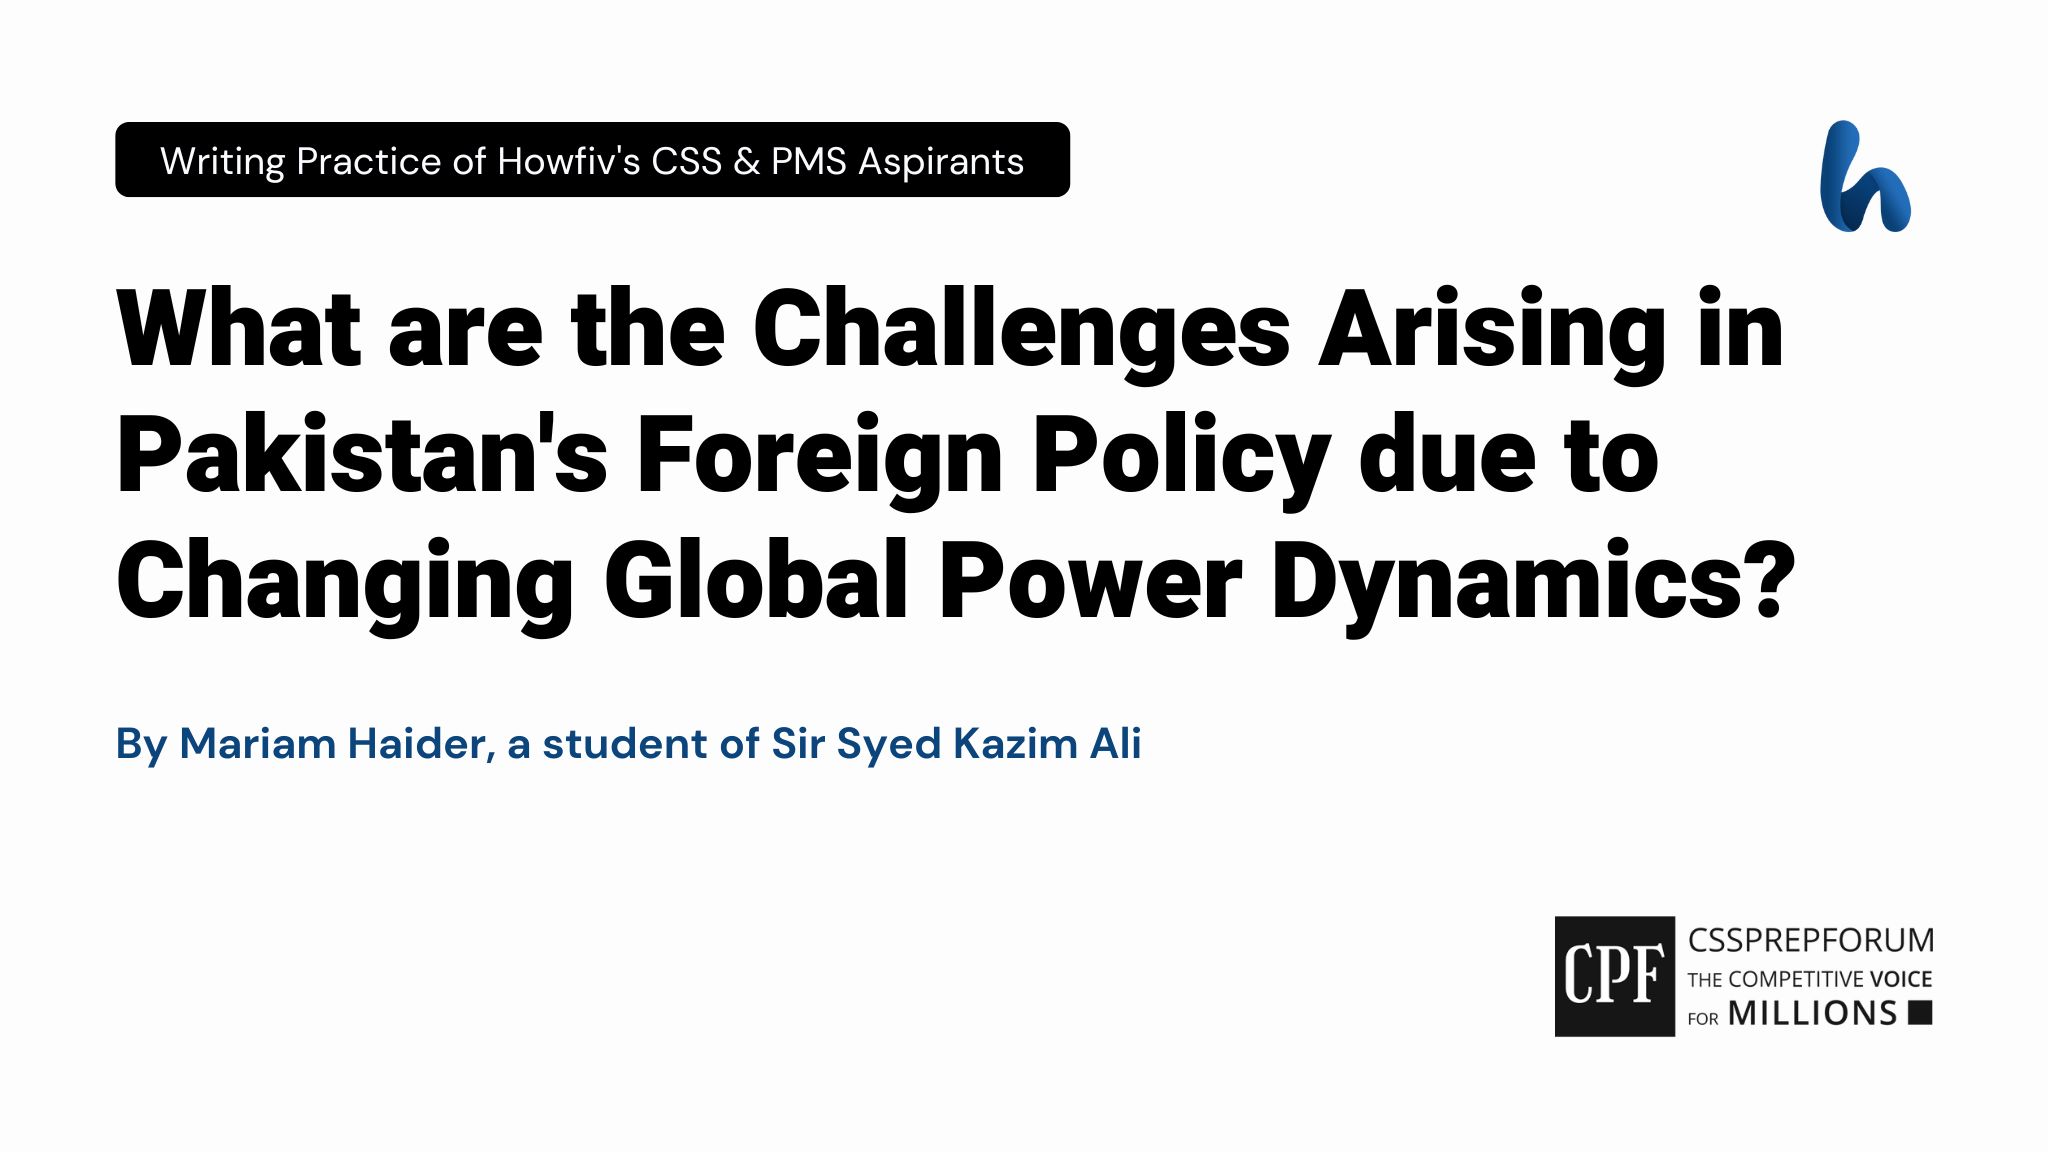 Pakistan's Foreign Policy Challenges by Mariam Haider